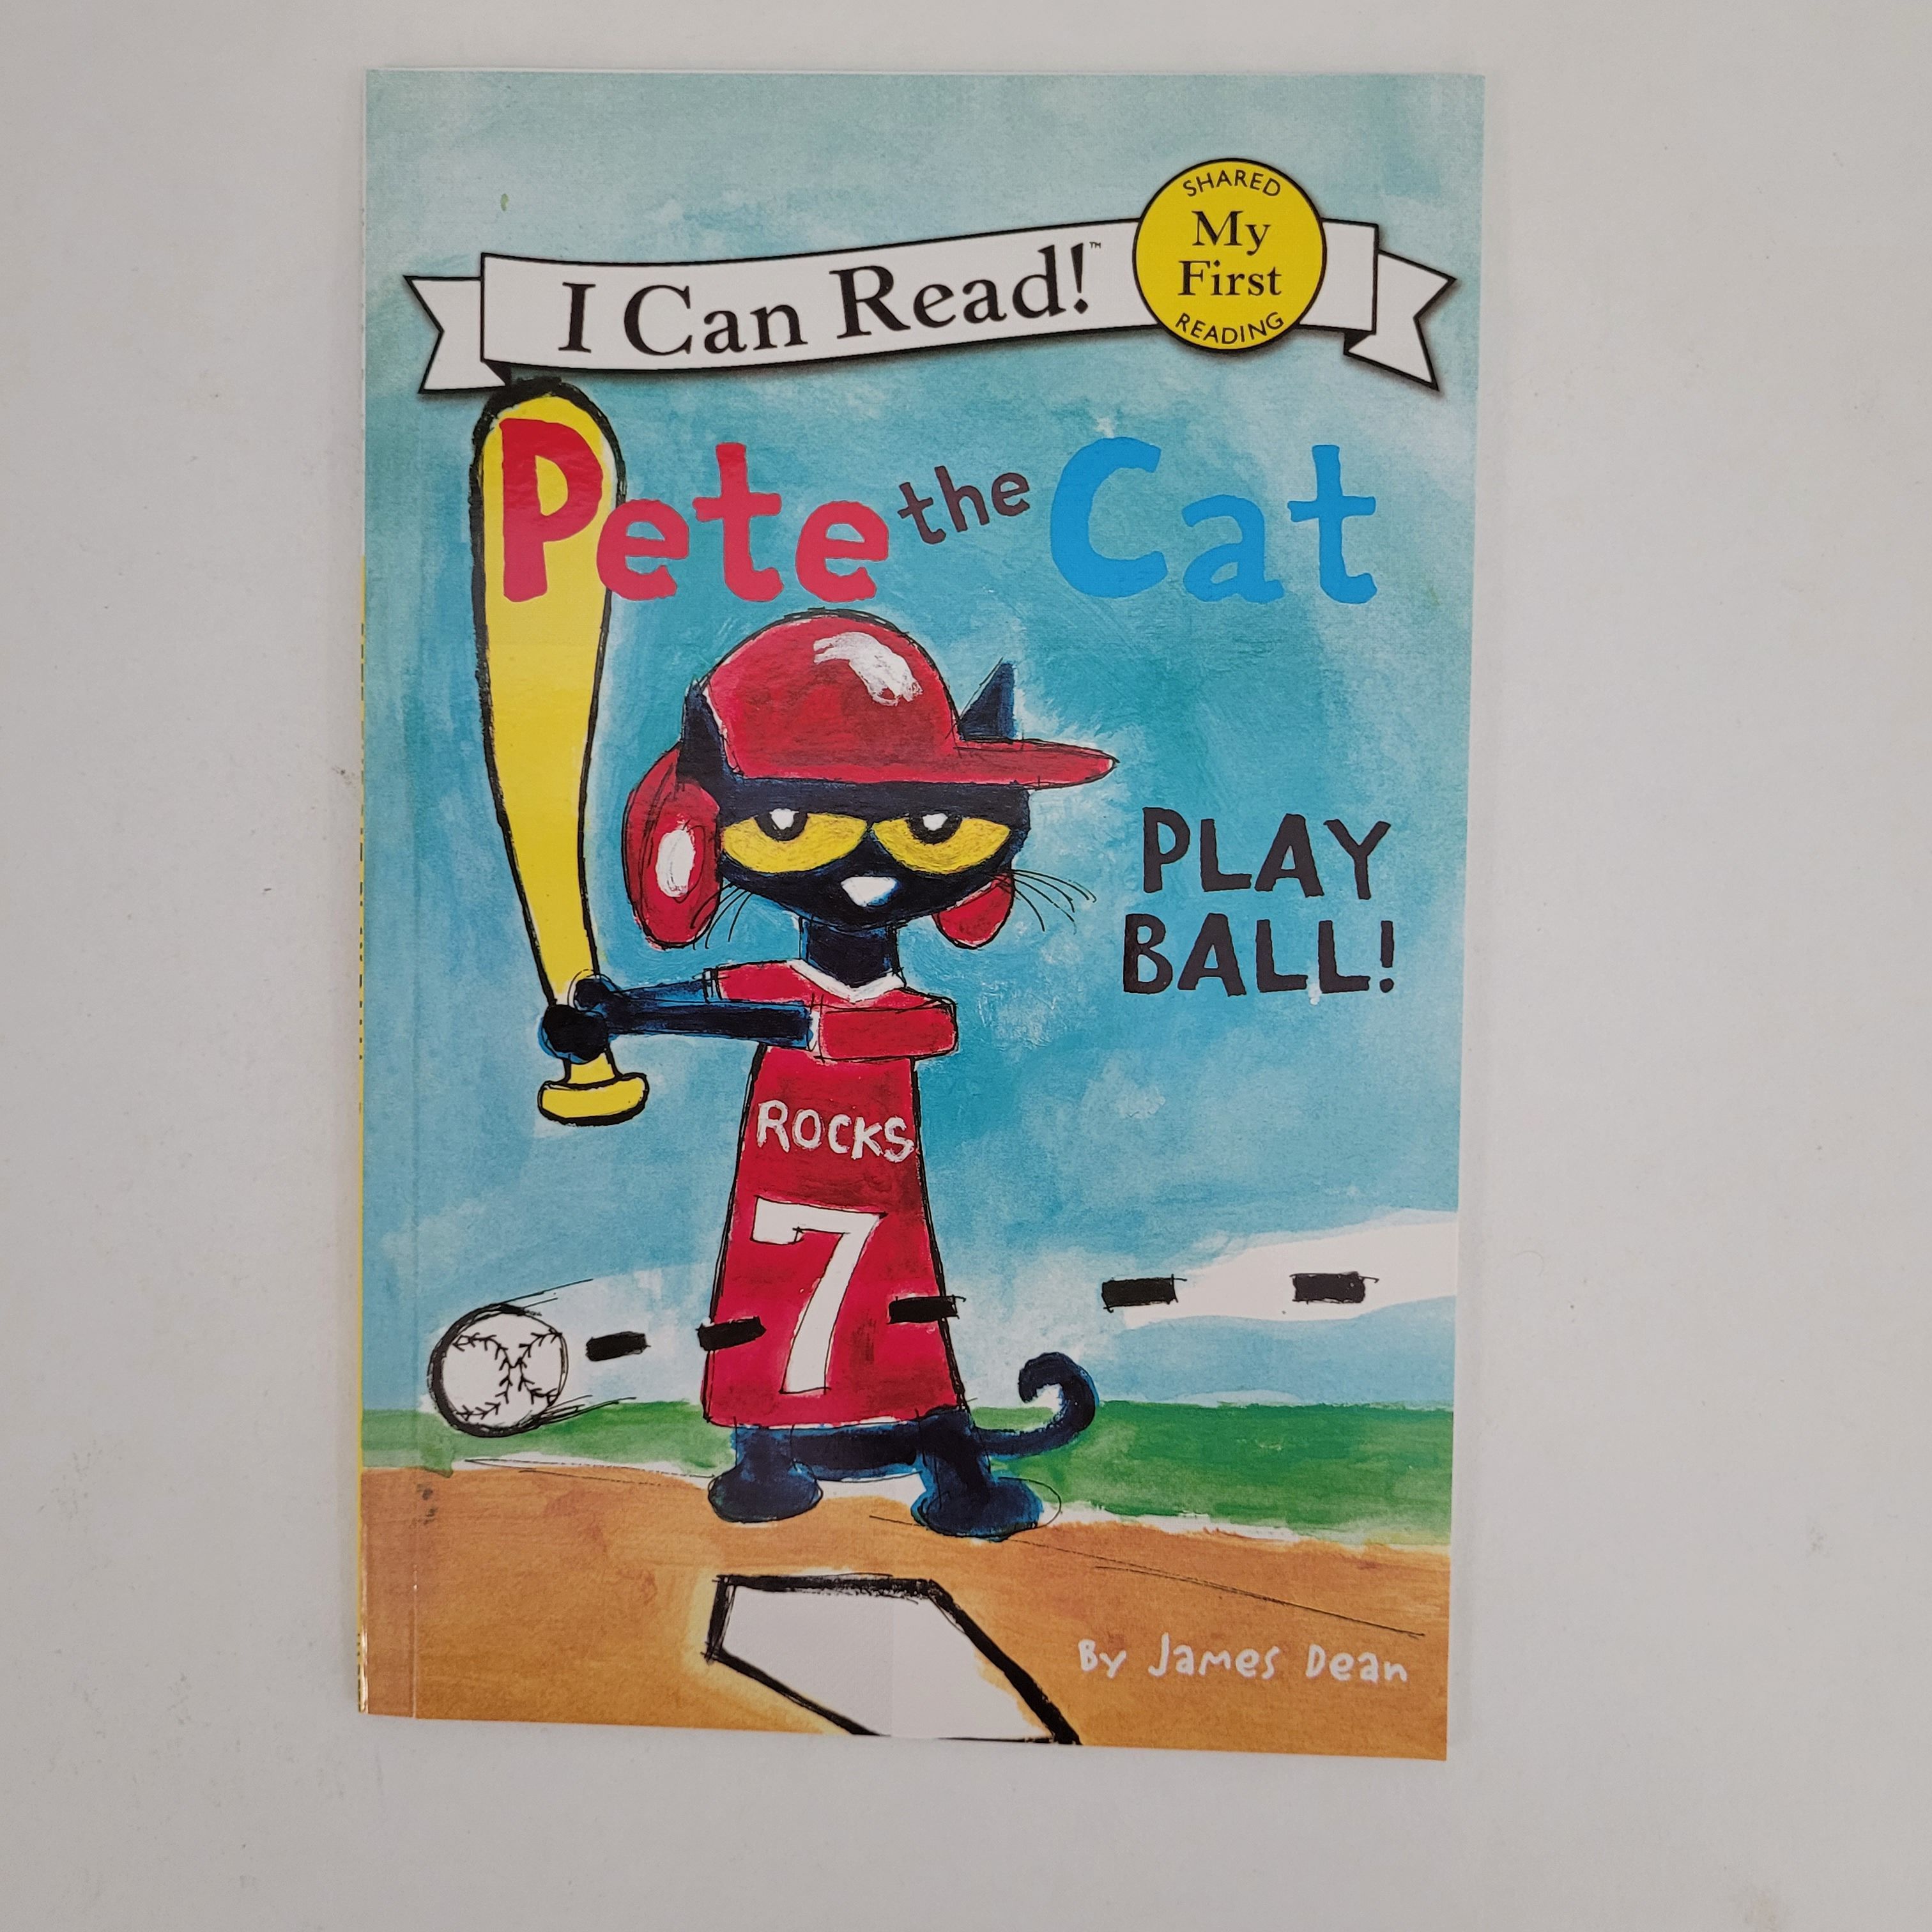 Pete the Cat PLAY BALL!